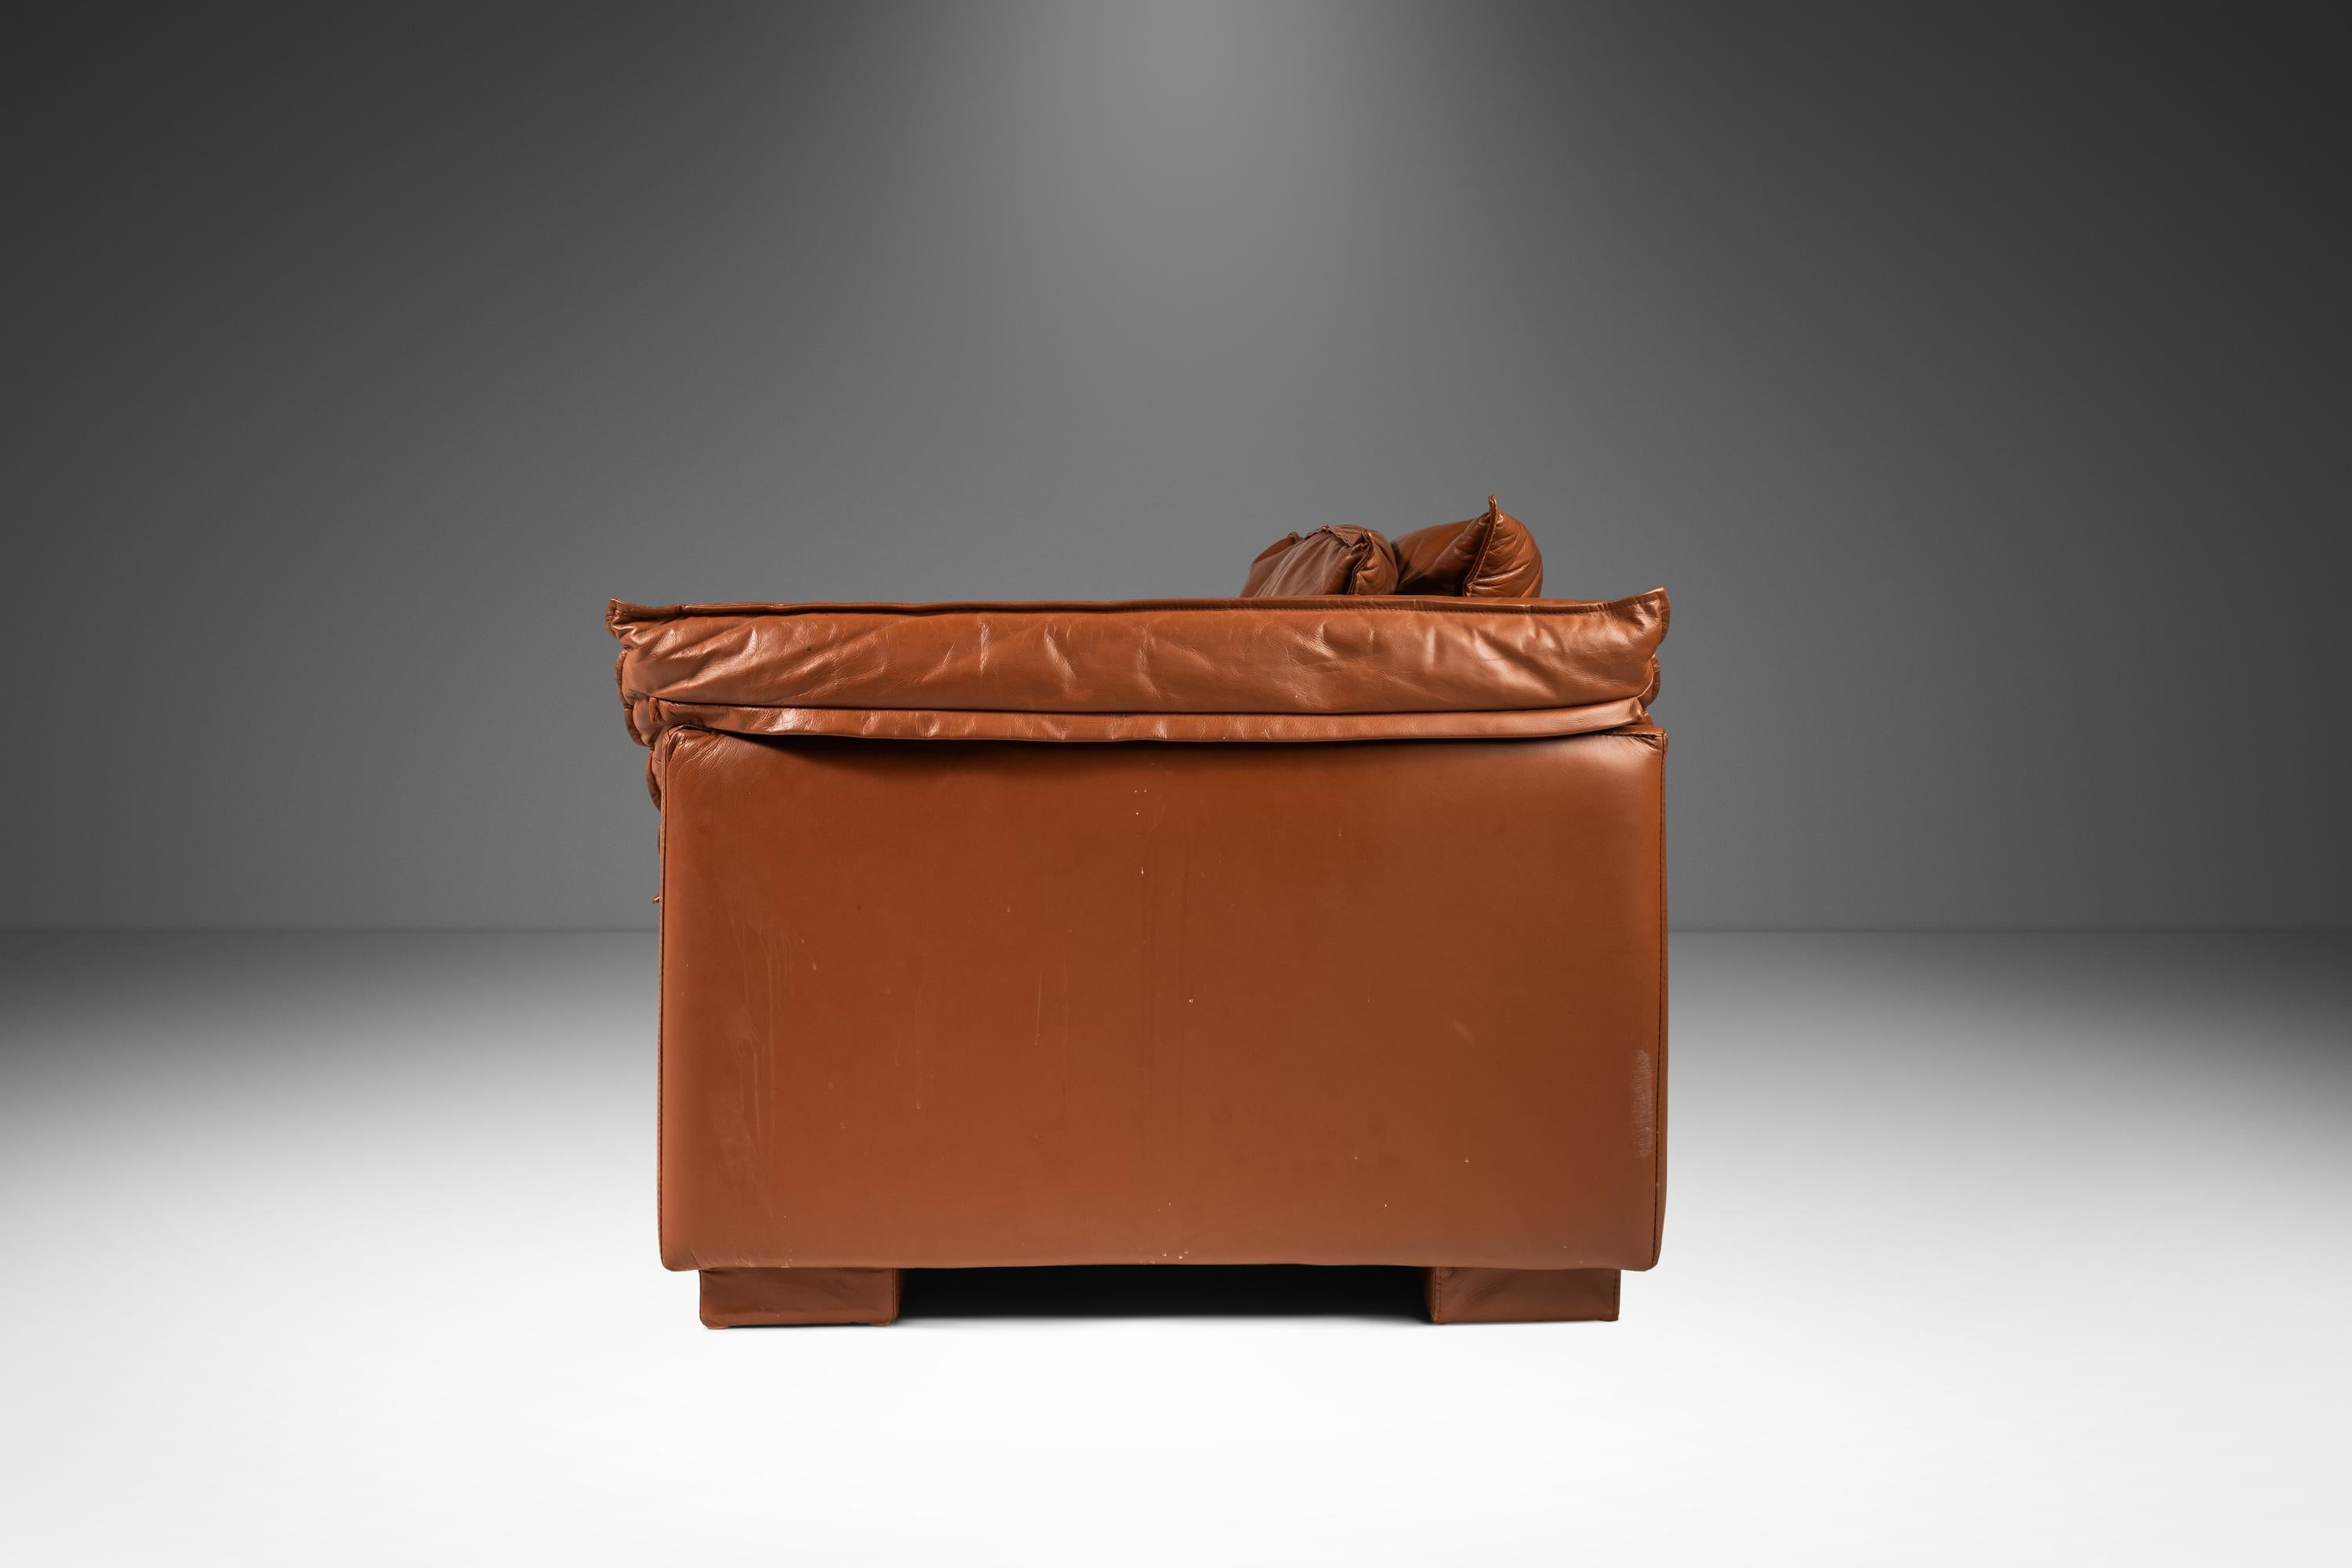 American Low Profile Sofa in Cognac Brown Leather in the Manner of Niels Eilersen, 1980's For Sale